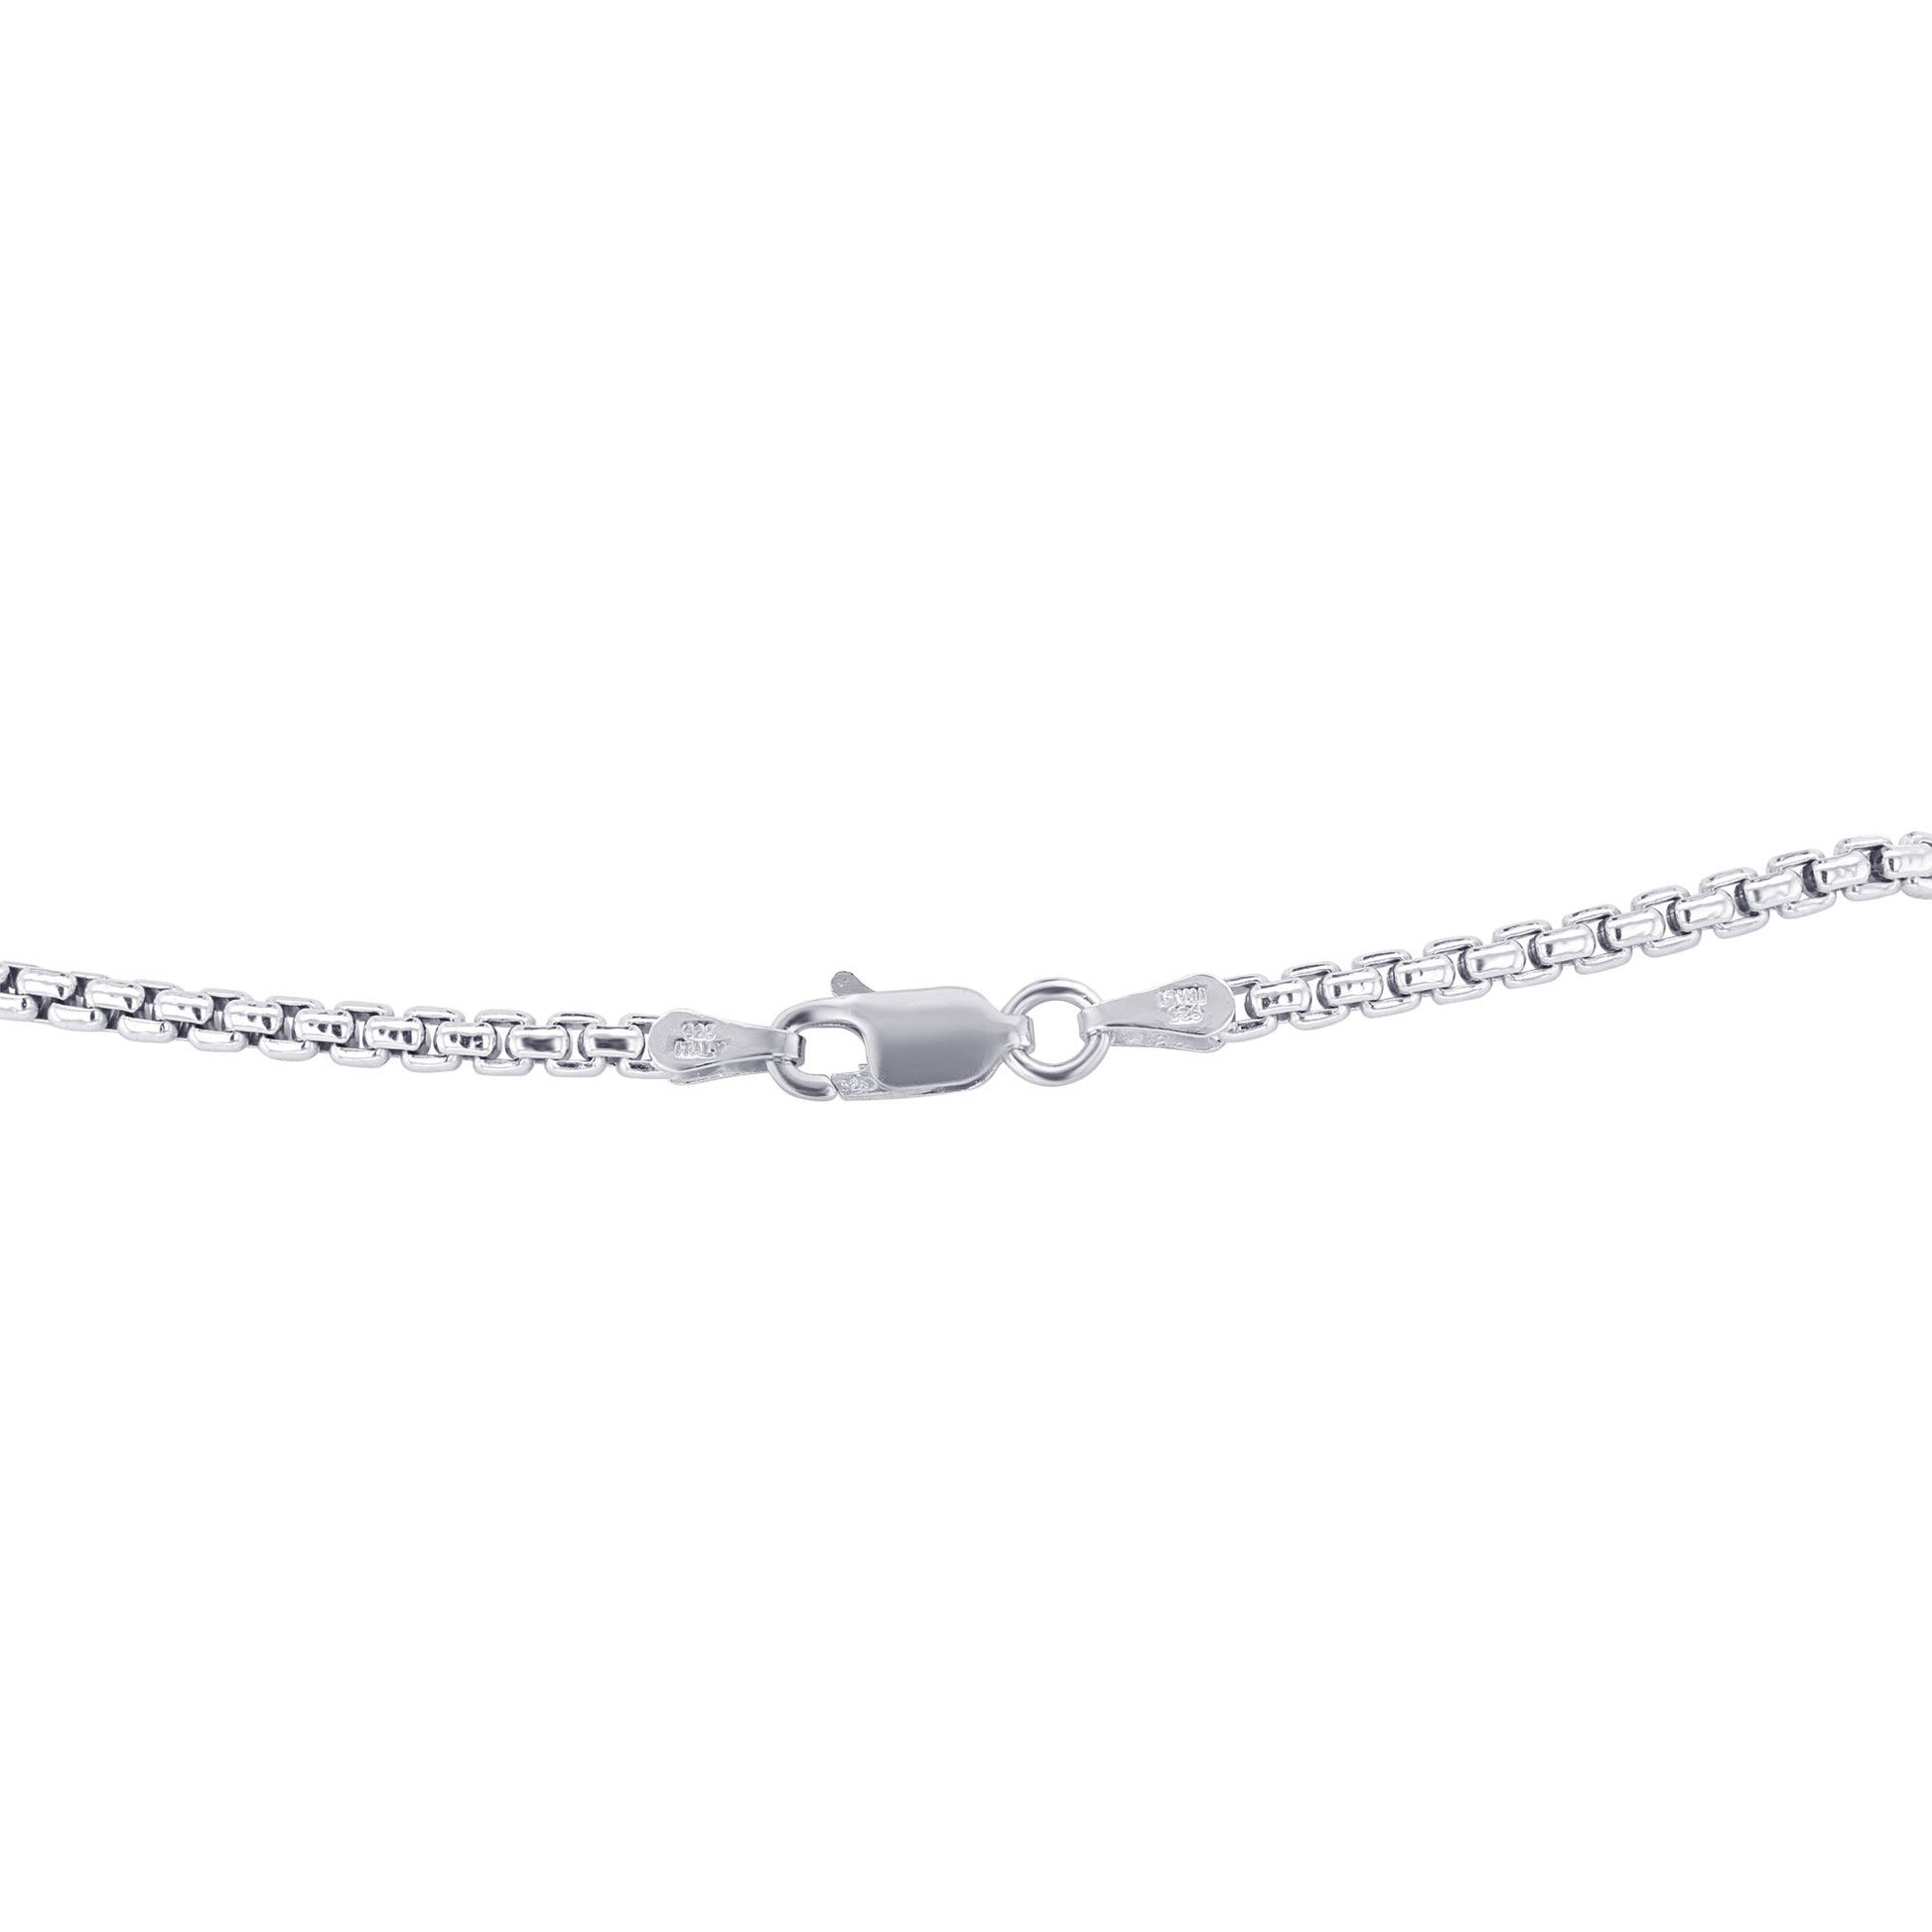 Creed Silver Box Link Chain Necklace